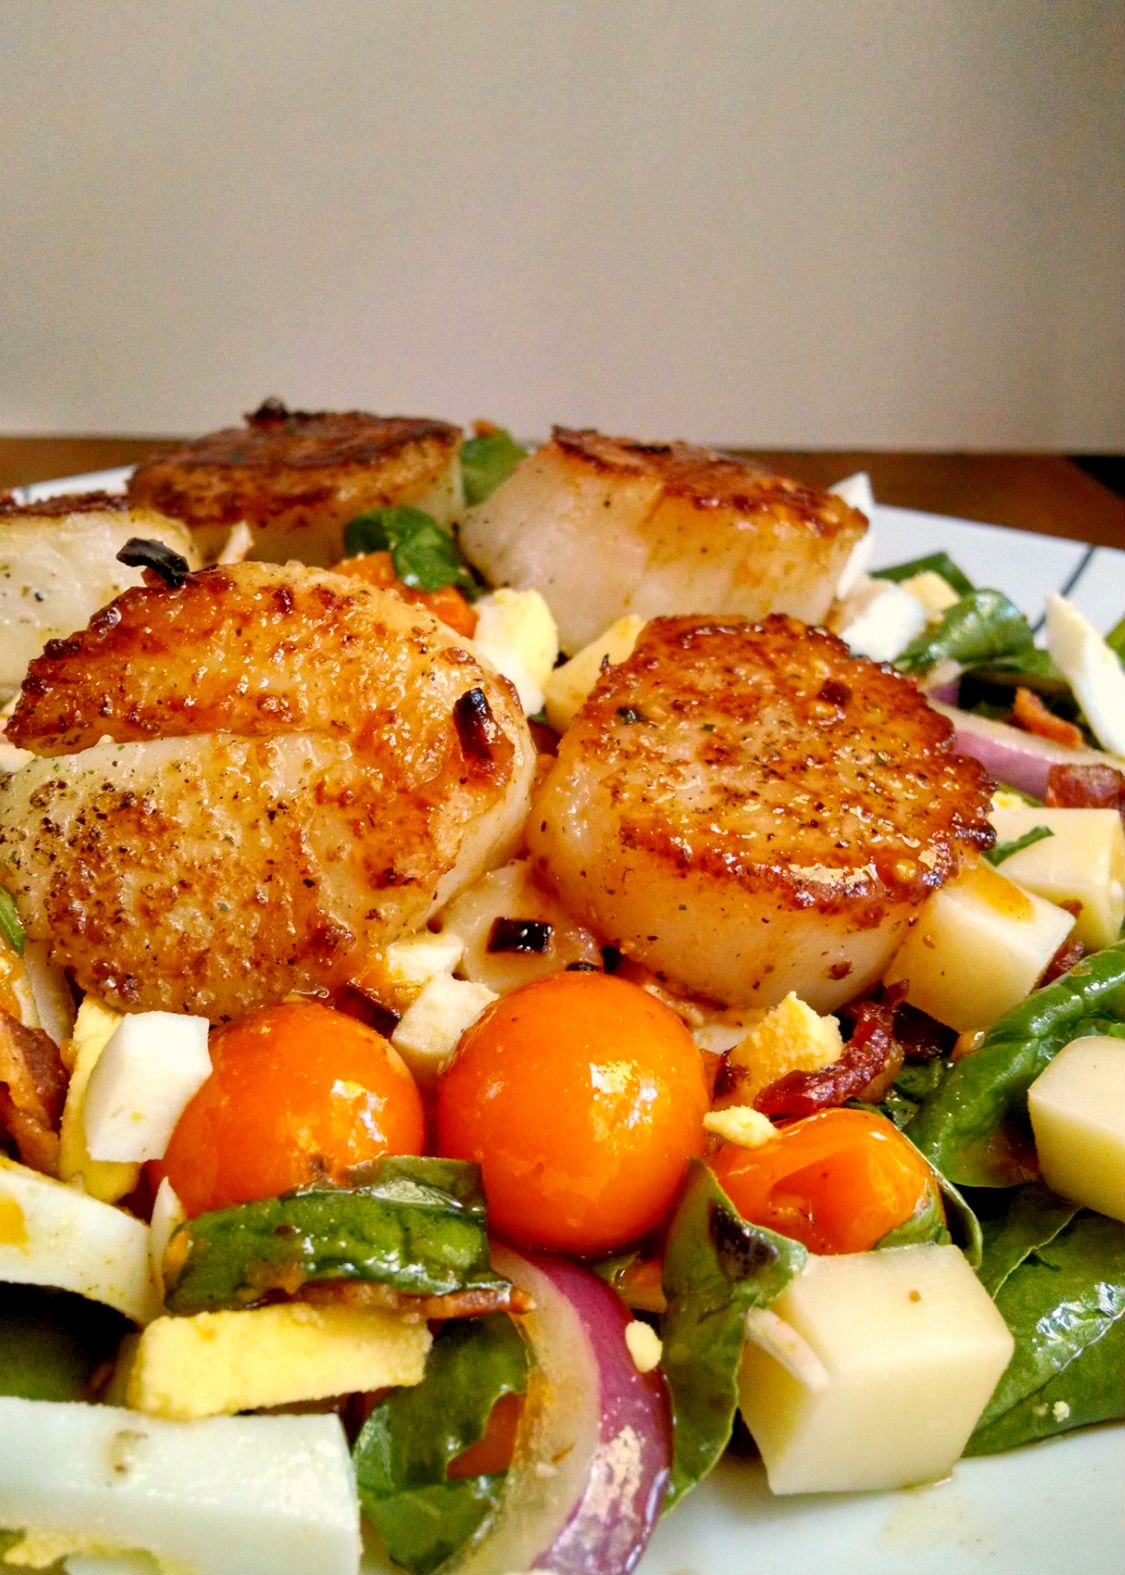 Blistered Tomato Salad with Pan Seared Scallops